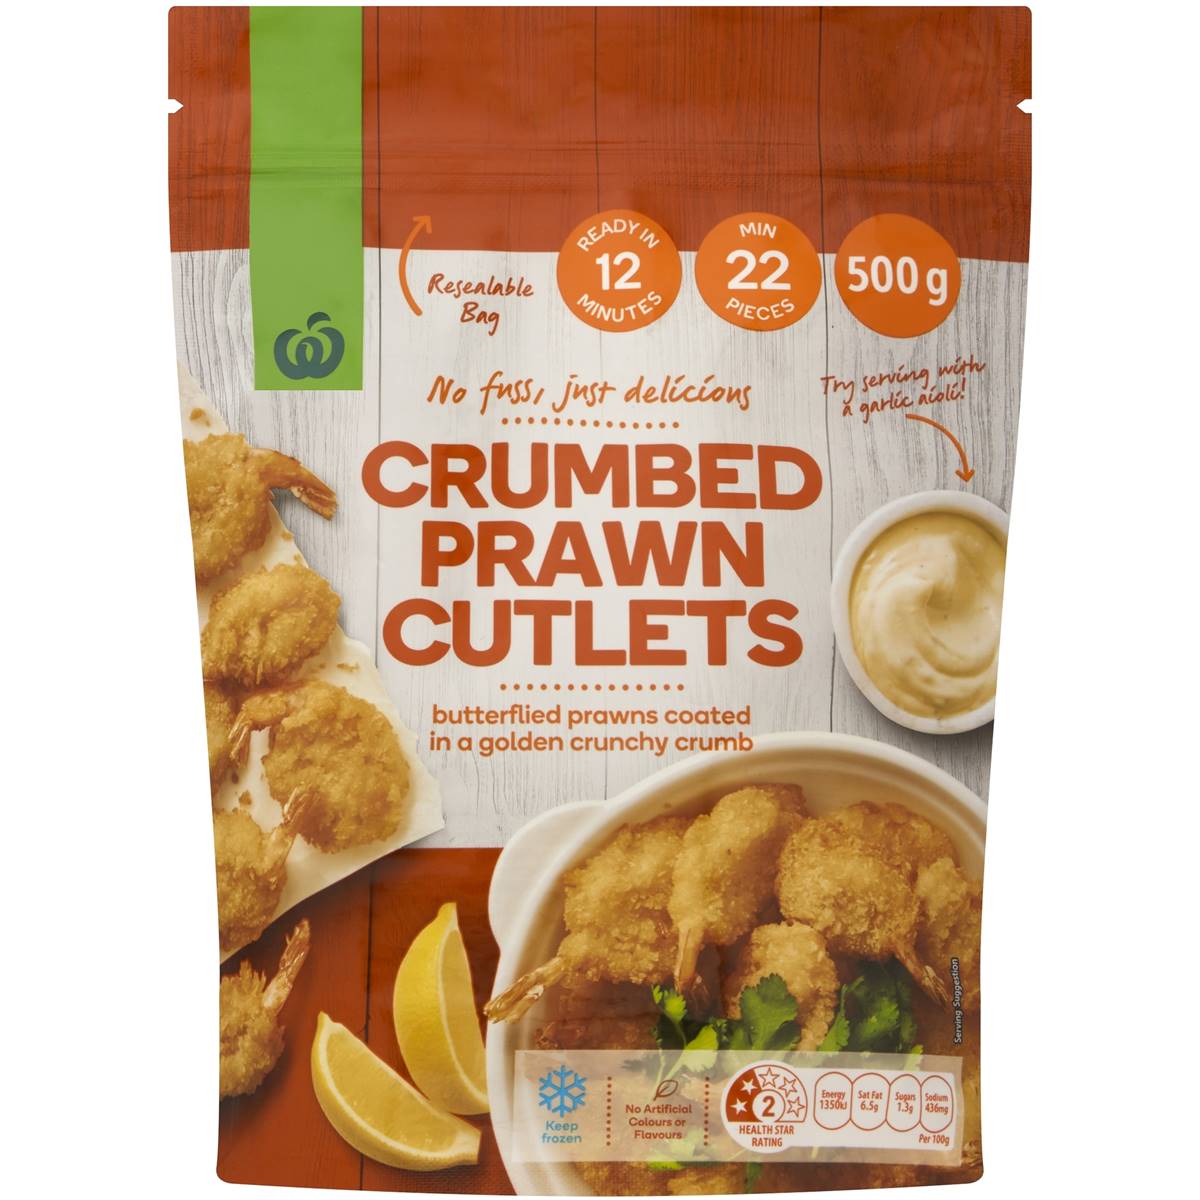 Calories in Woolworths Crumbed Prawn Cutlets